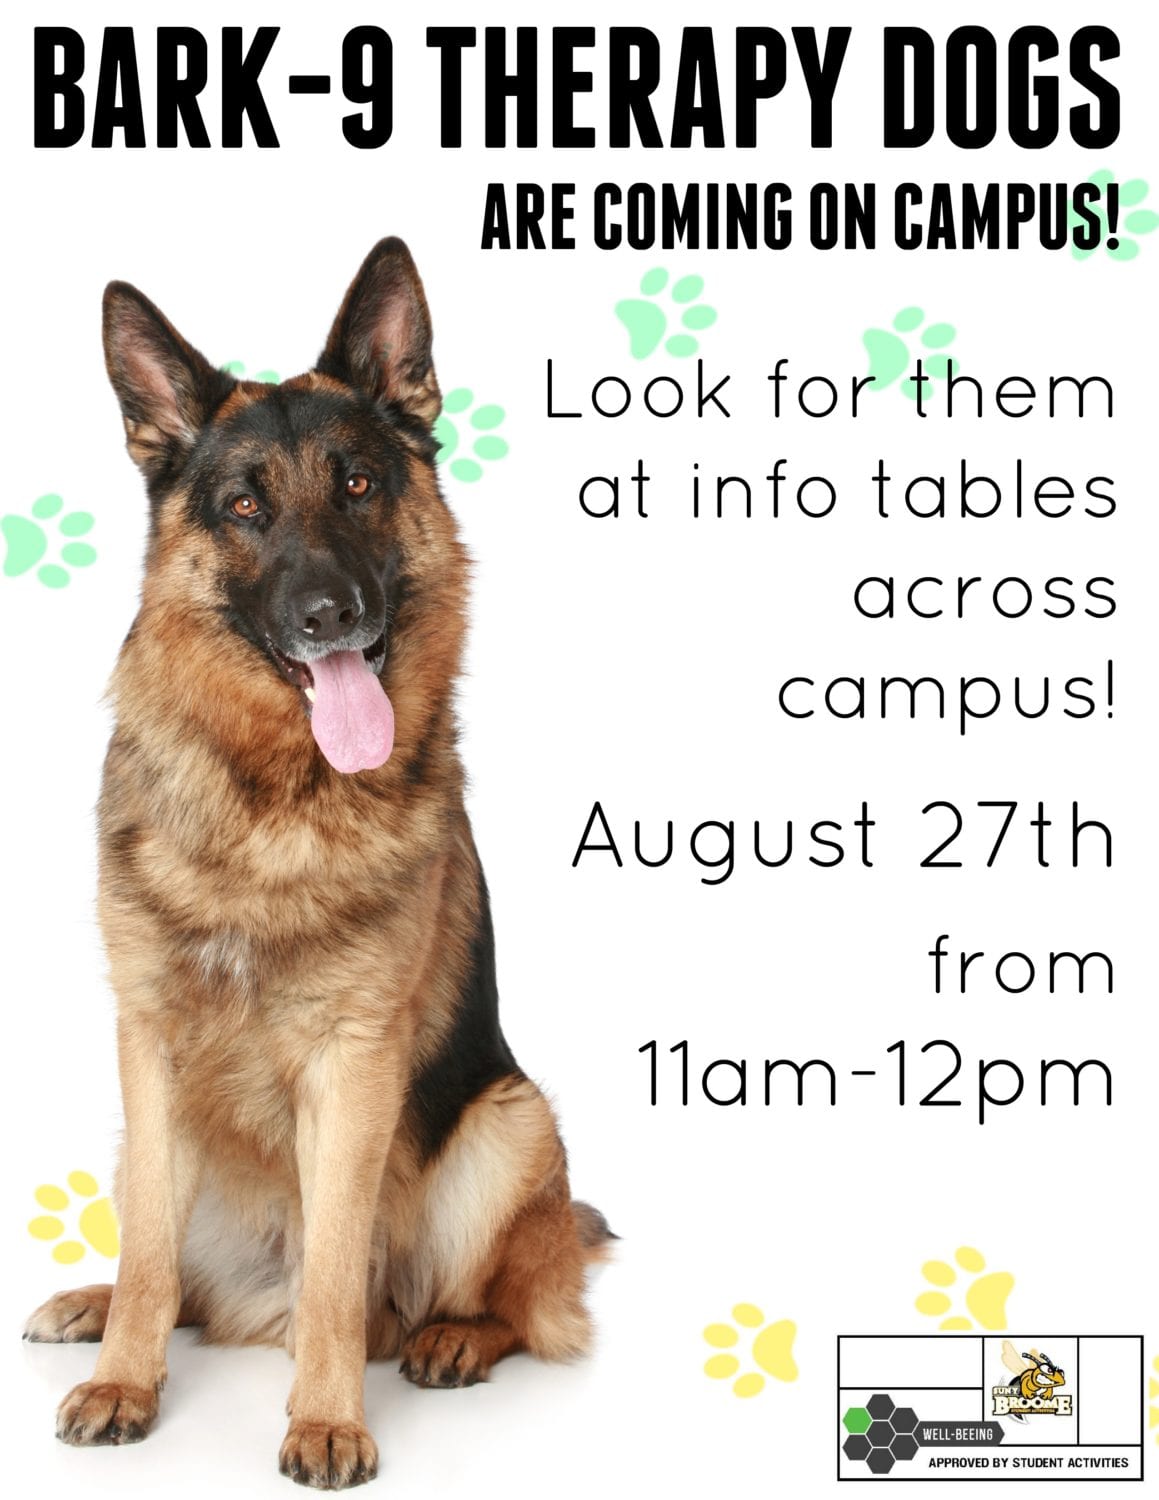 Bark-9 therapy dogs are coming to campus Aug. 27